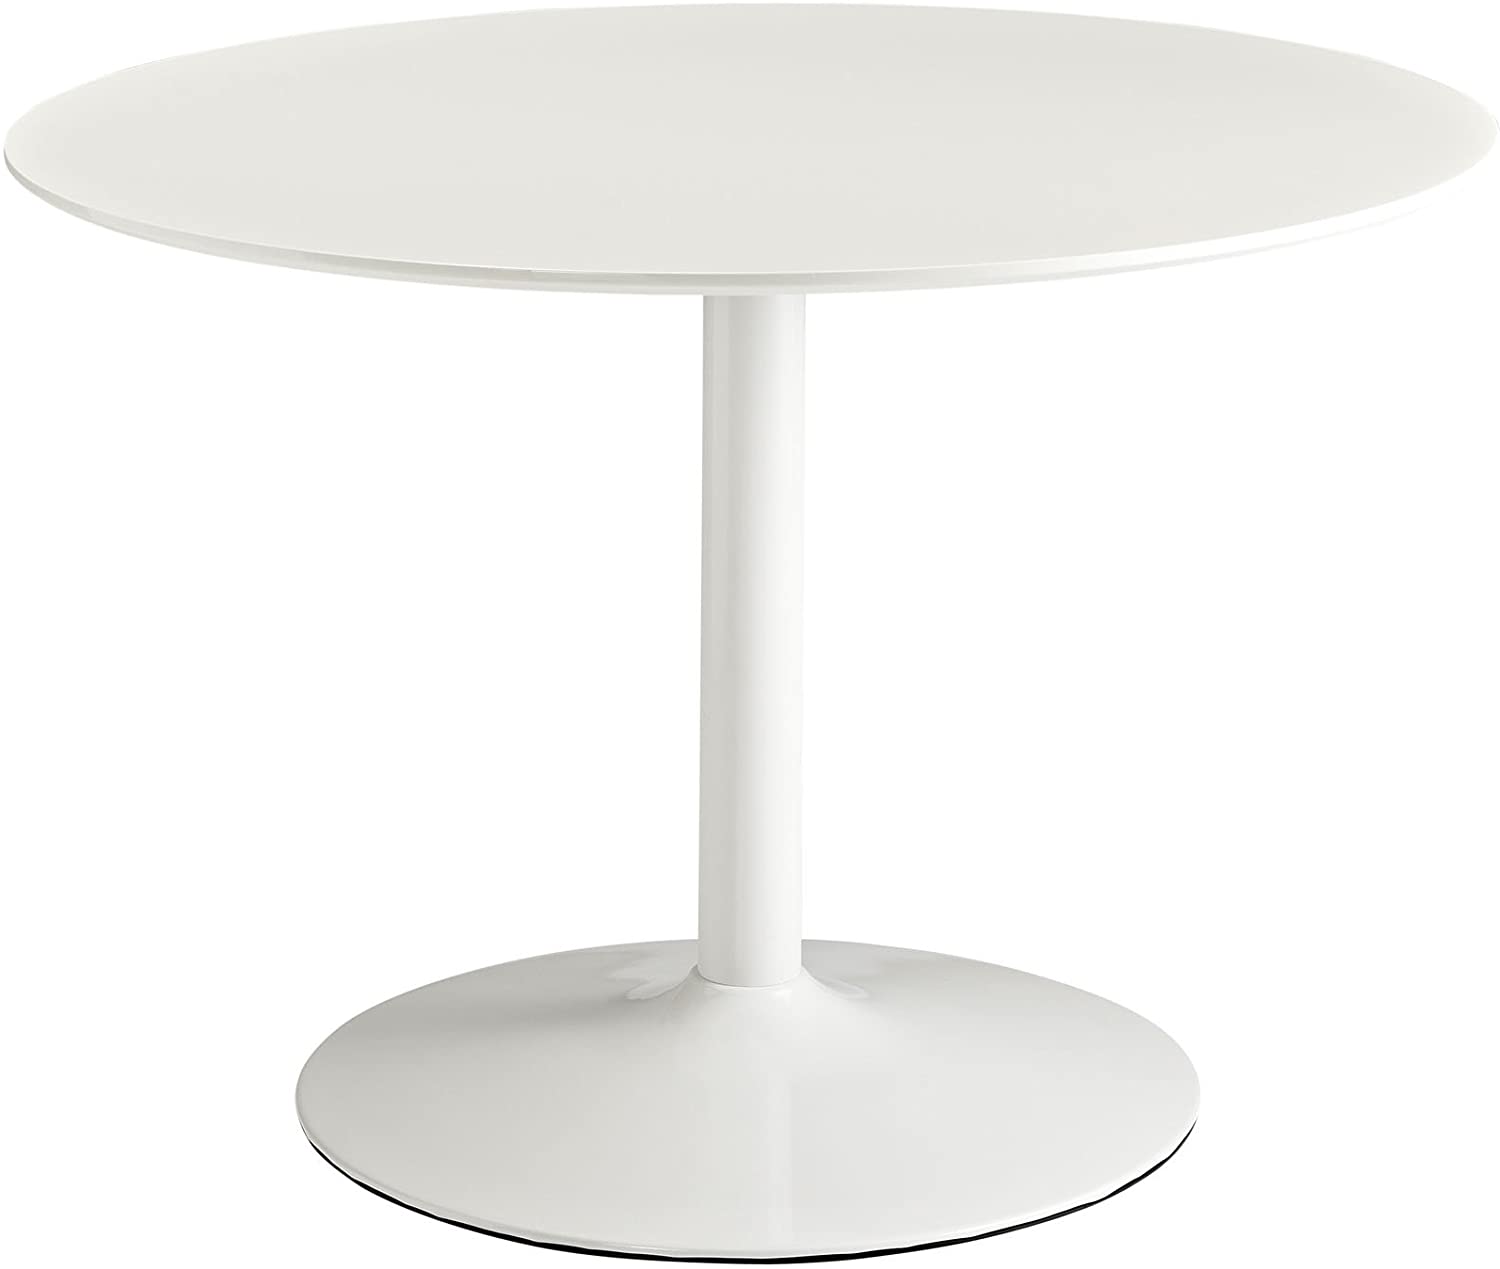 B007QUMA78 Modway Rostrum Modern 44" Round Top Pedestal Kitchen and Dining Room Table in White